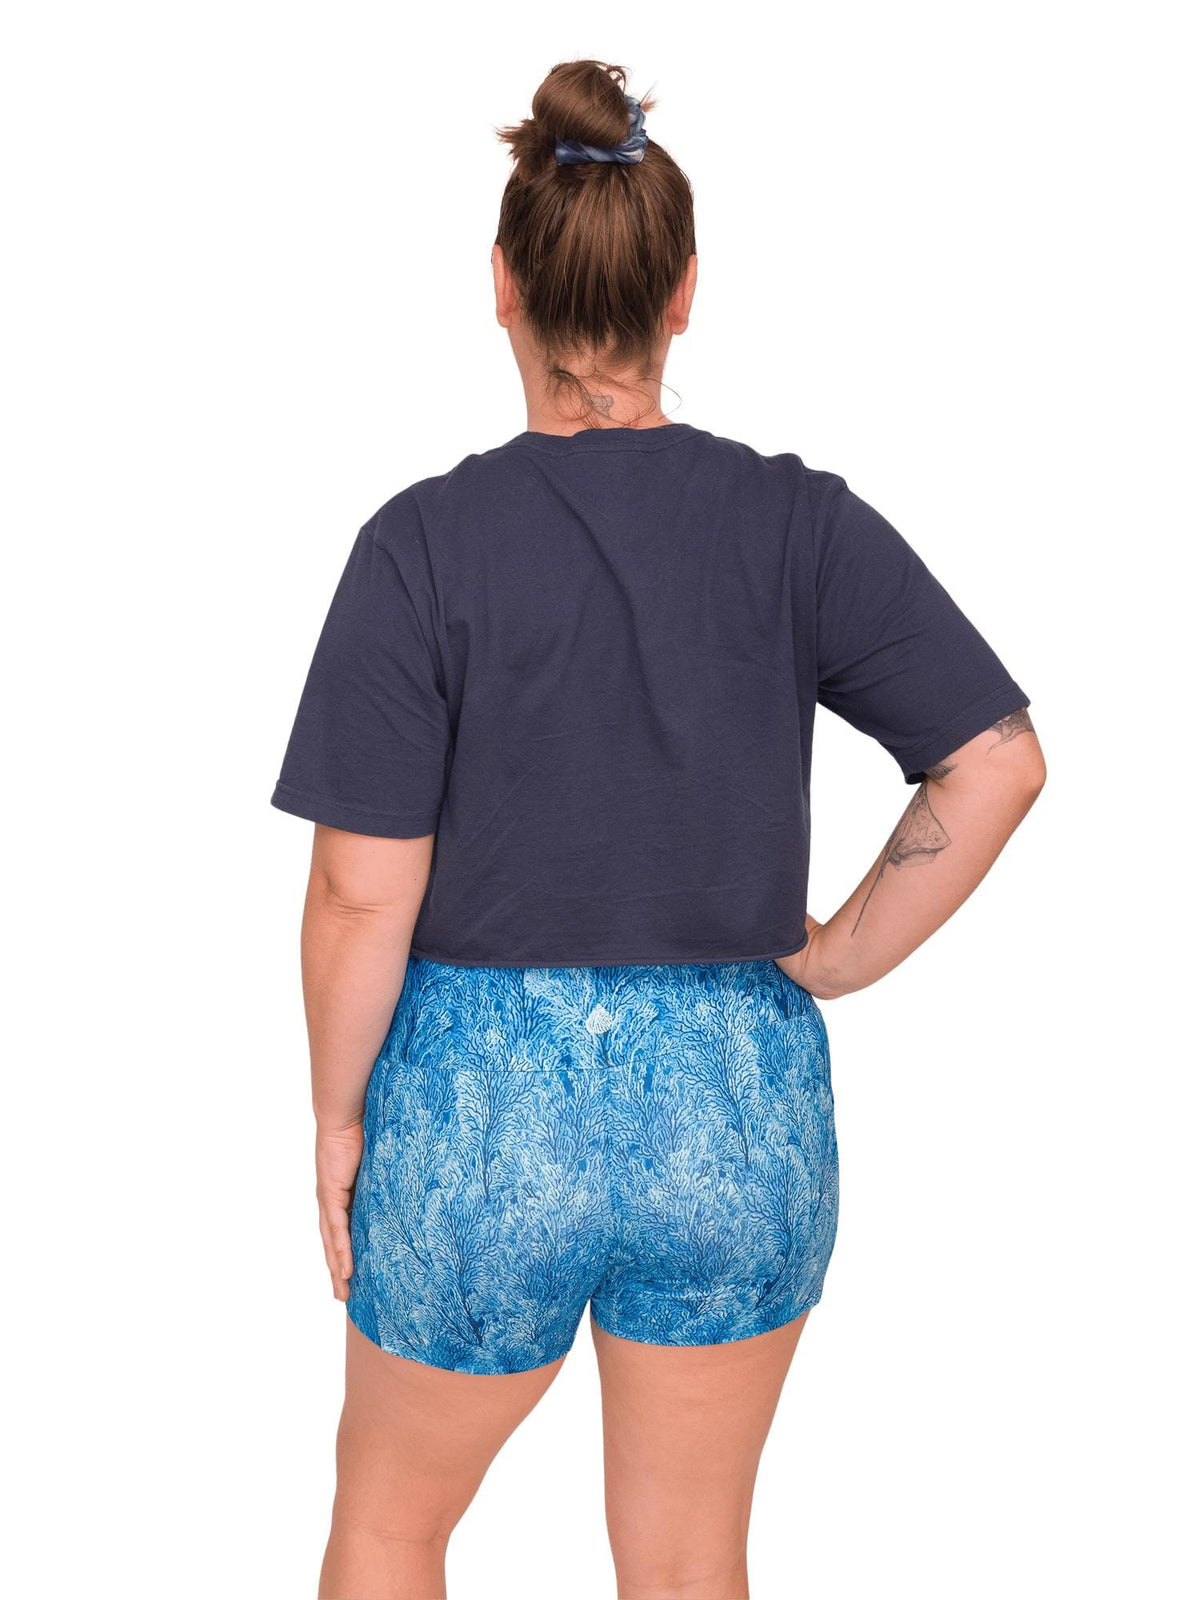 Model: Camilla is the Operations Manager here at Waterlust. She loves using her camera to communicate marine conservation issues. She is 5&#39;8&quot;, 190 lbs, a 36C, and wearing an XL shorts and L tee.